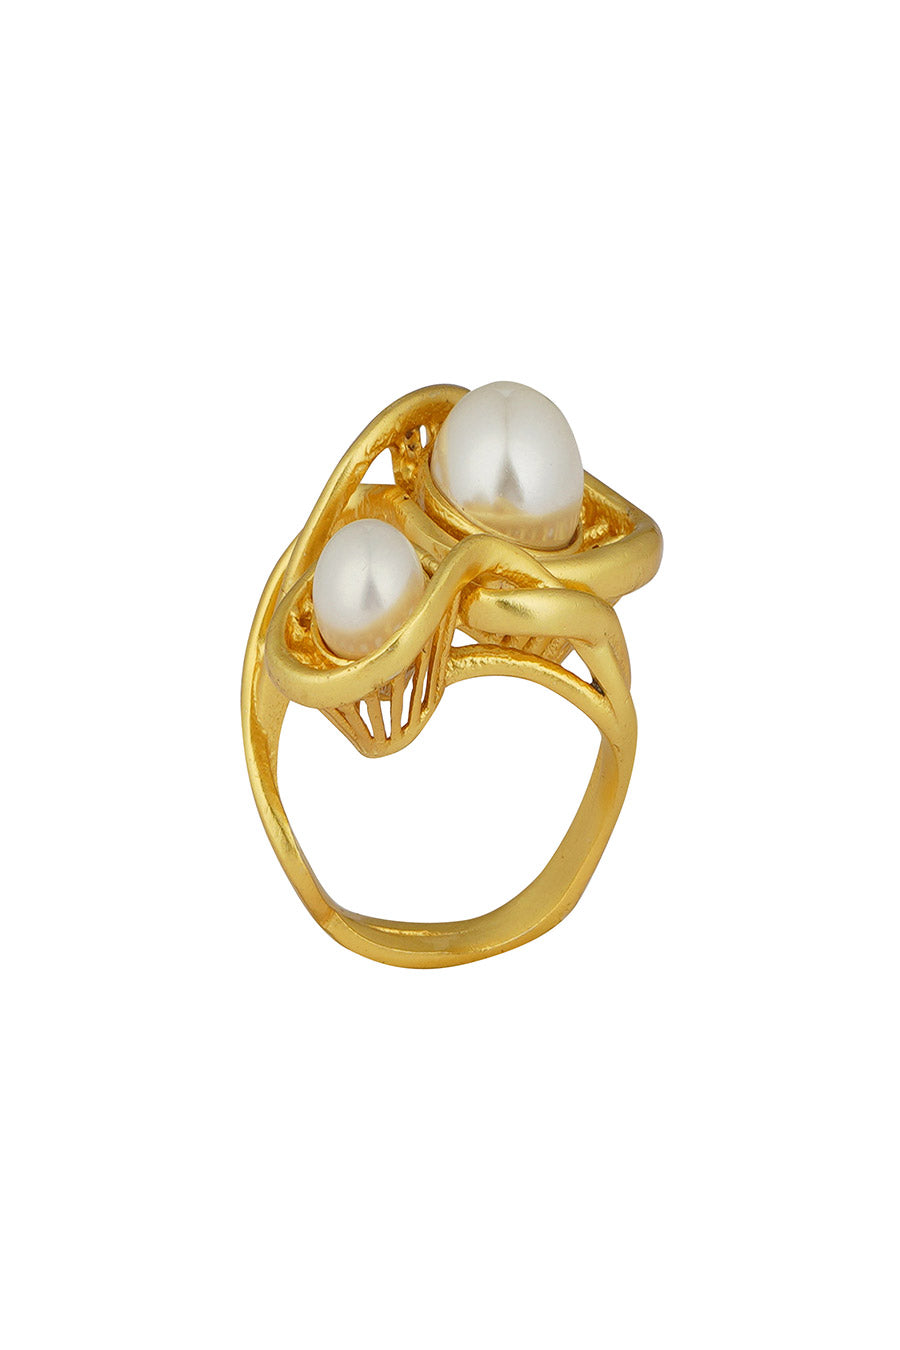 Twist in The Tale - Gold Plated Pearl Ring